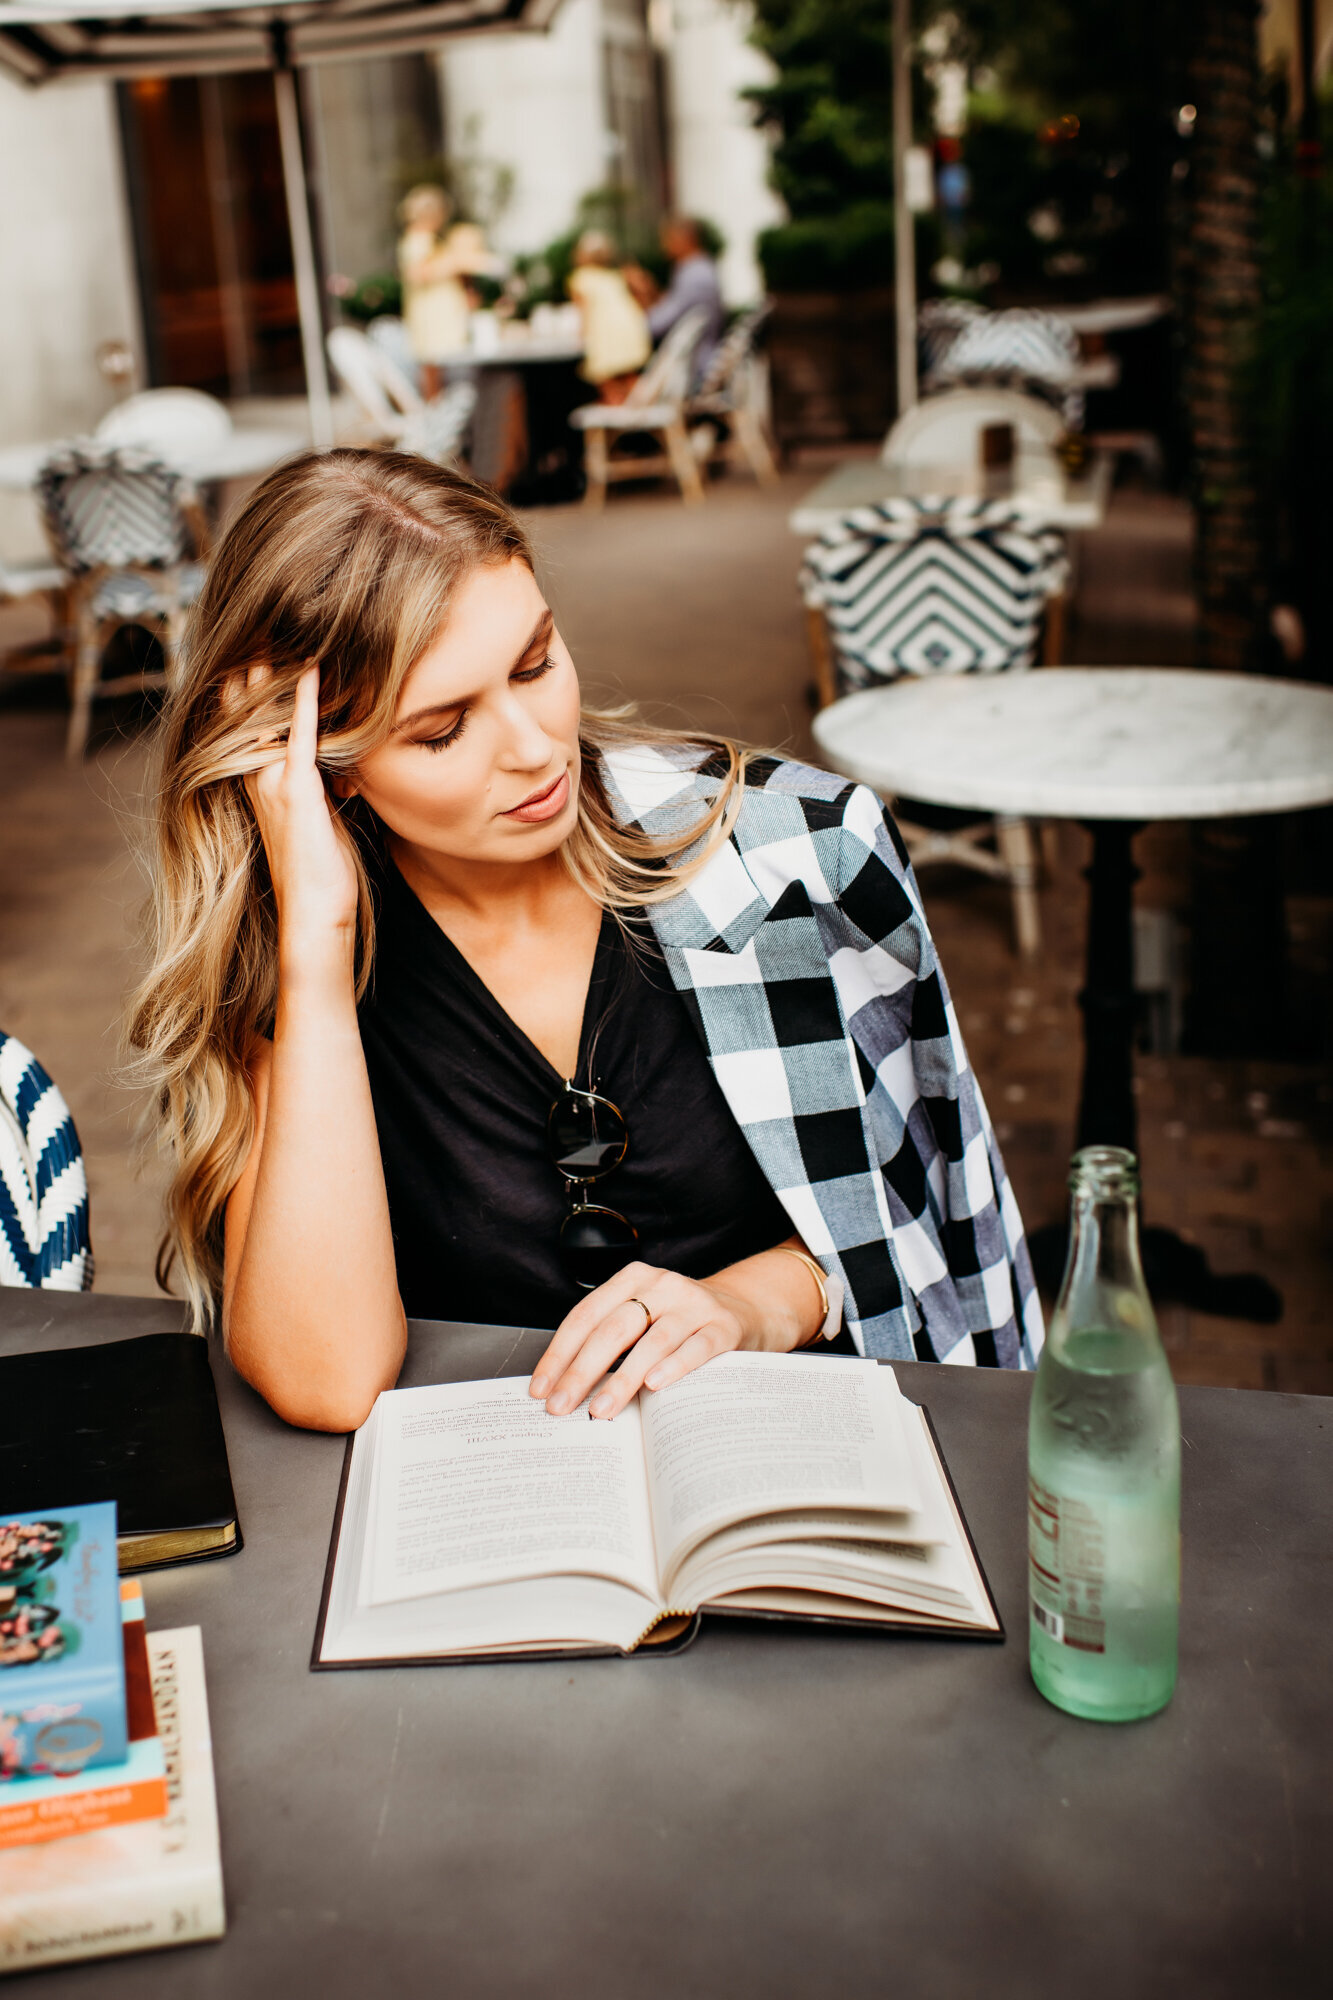 Branding Photographer, a woman reads a book at a cafe table with a sparkling water bottle beside her